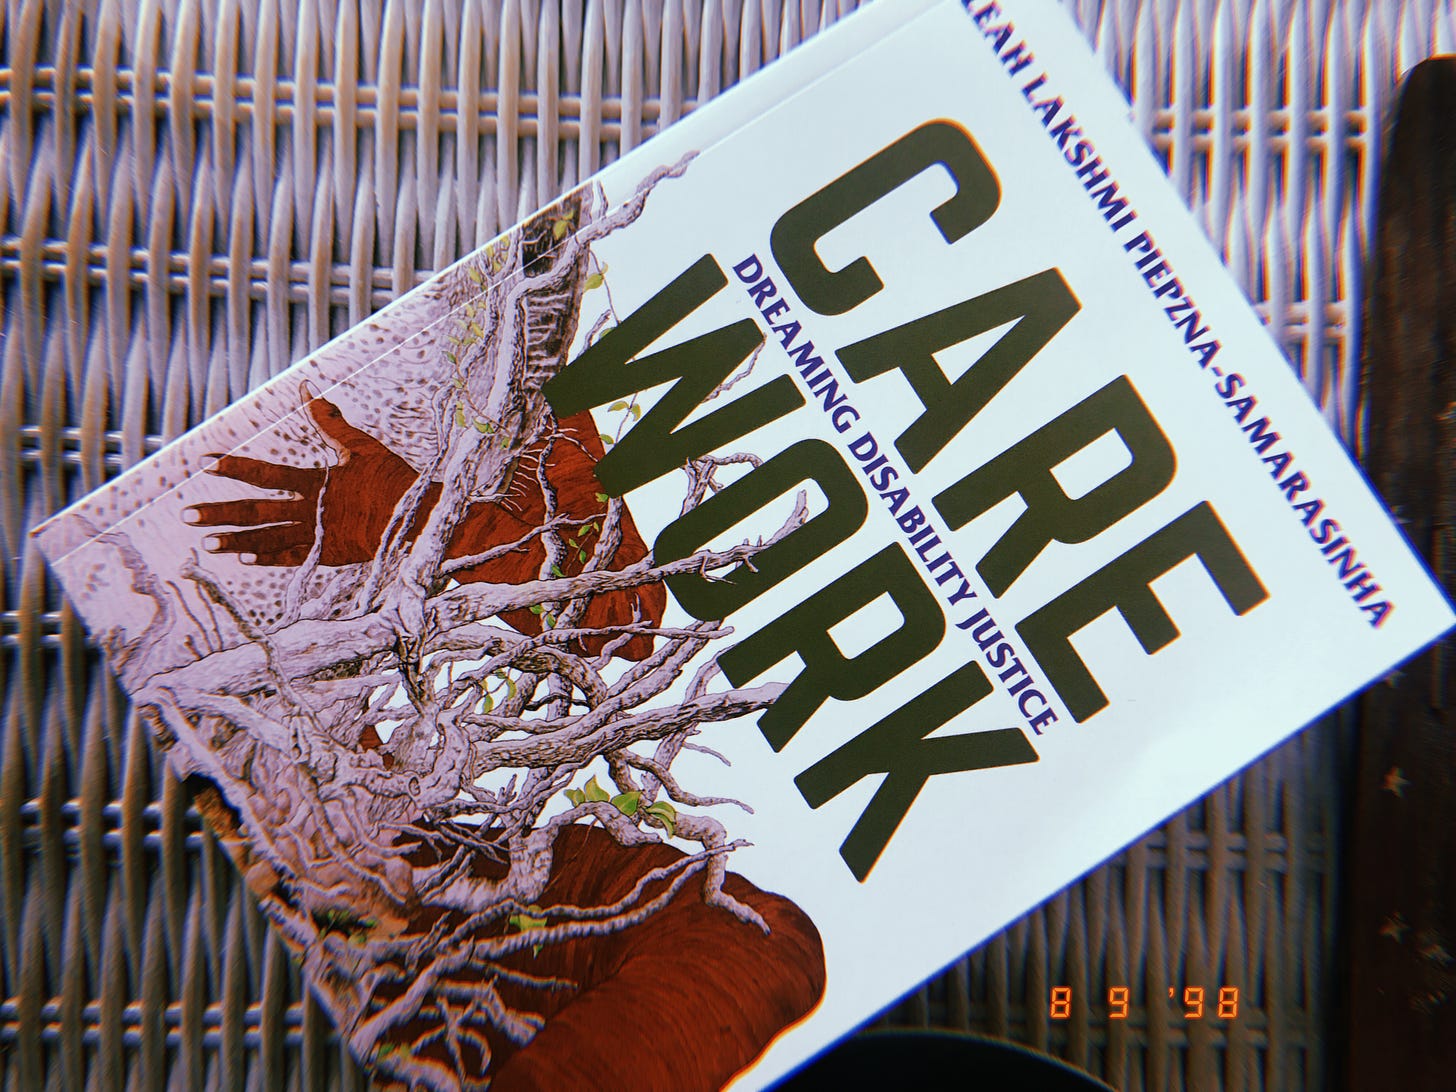 care work, a book with a white cover and dark green title text and an image of a orangeish brown arm and leg emerging from behind a tangle of white roots, sits on top of a wicker dresser